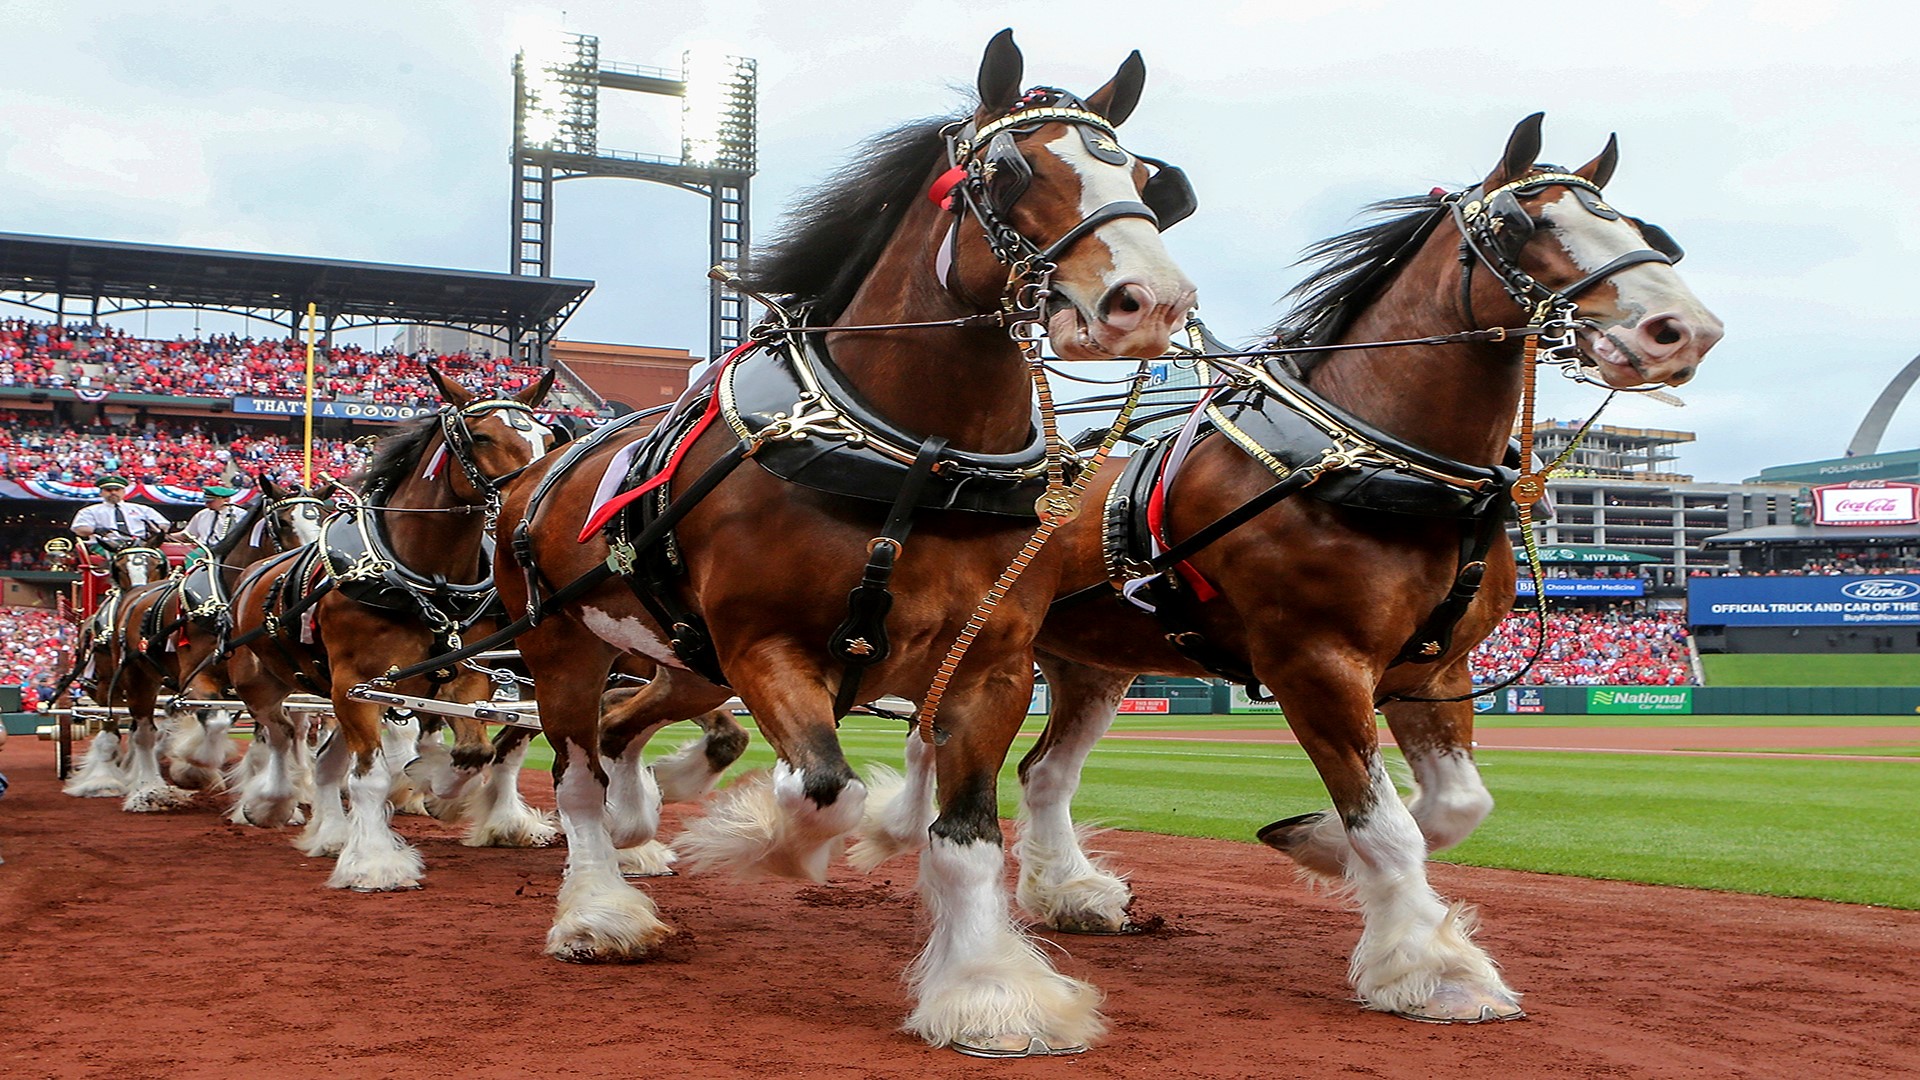 Budweiser Clydesdales to visit Bardstown for Kentucky Bourbon Festival